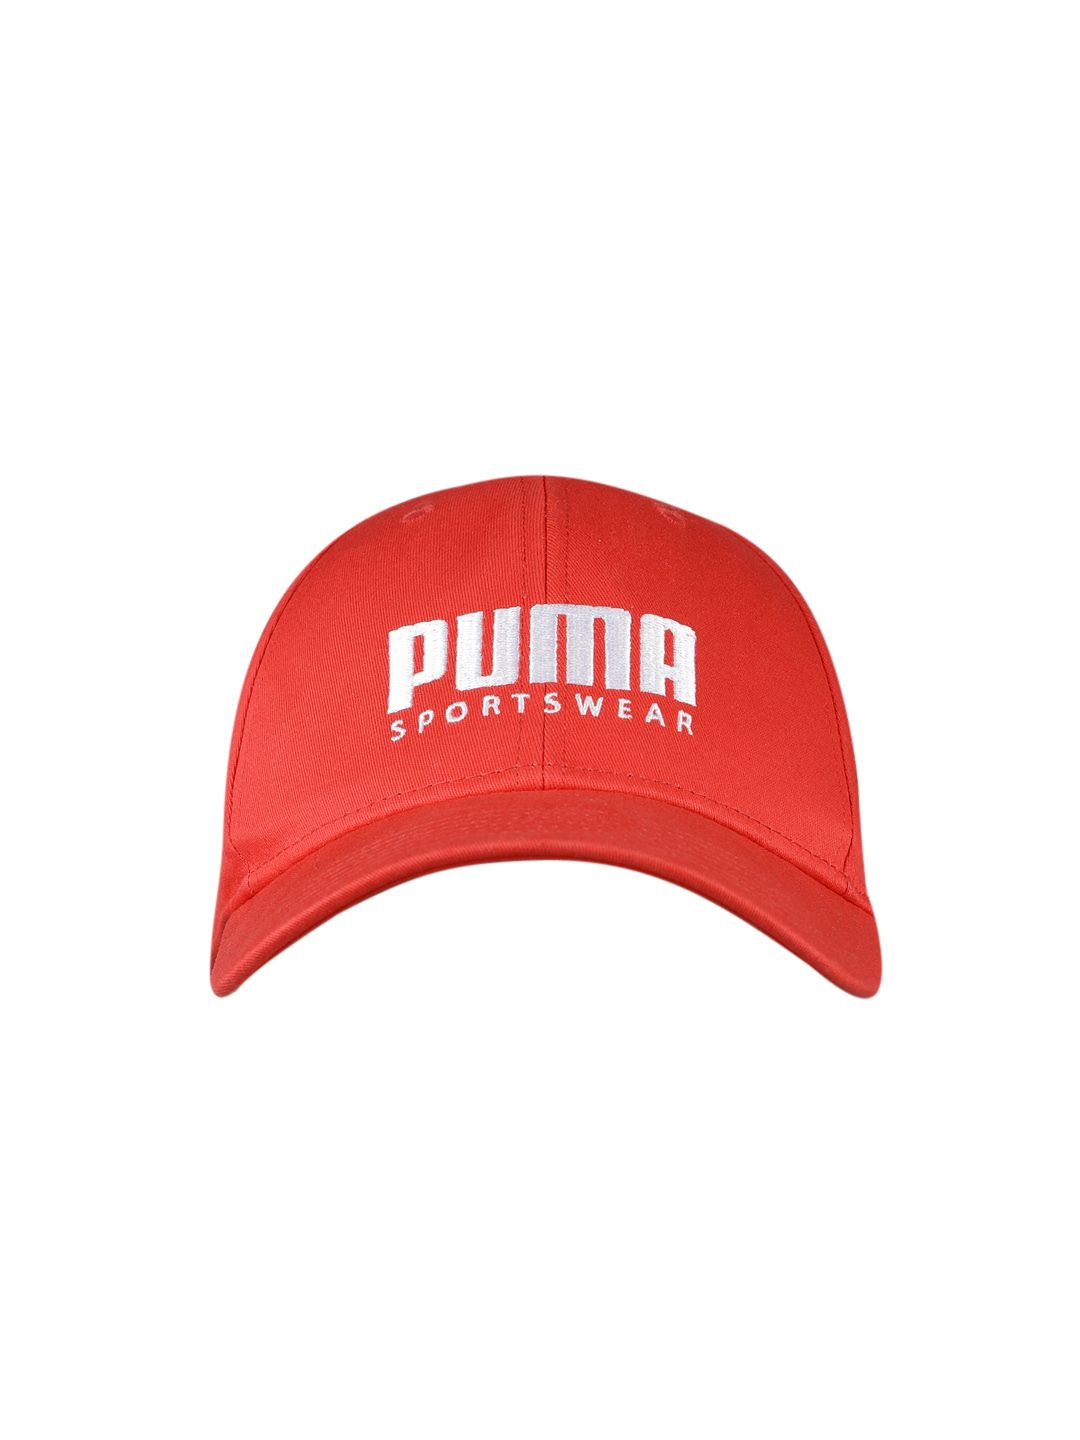 Puma Unisex Red Embroidered Stretch Fit Baseball Cap Price in India